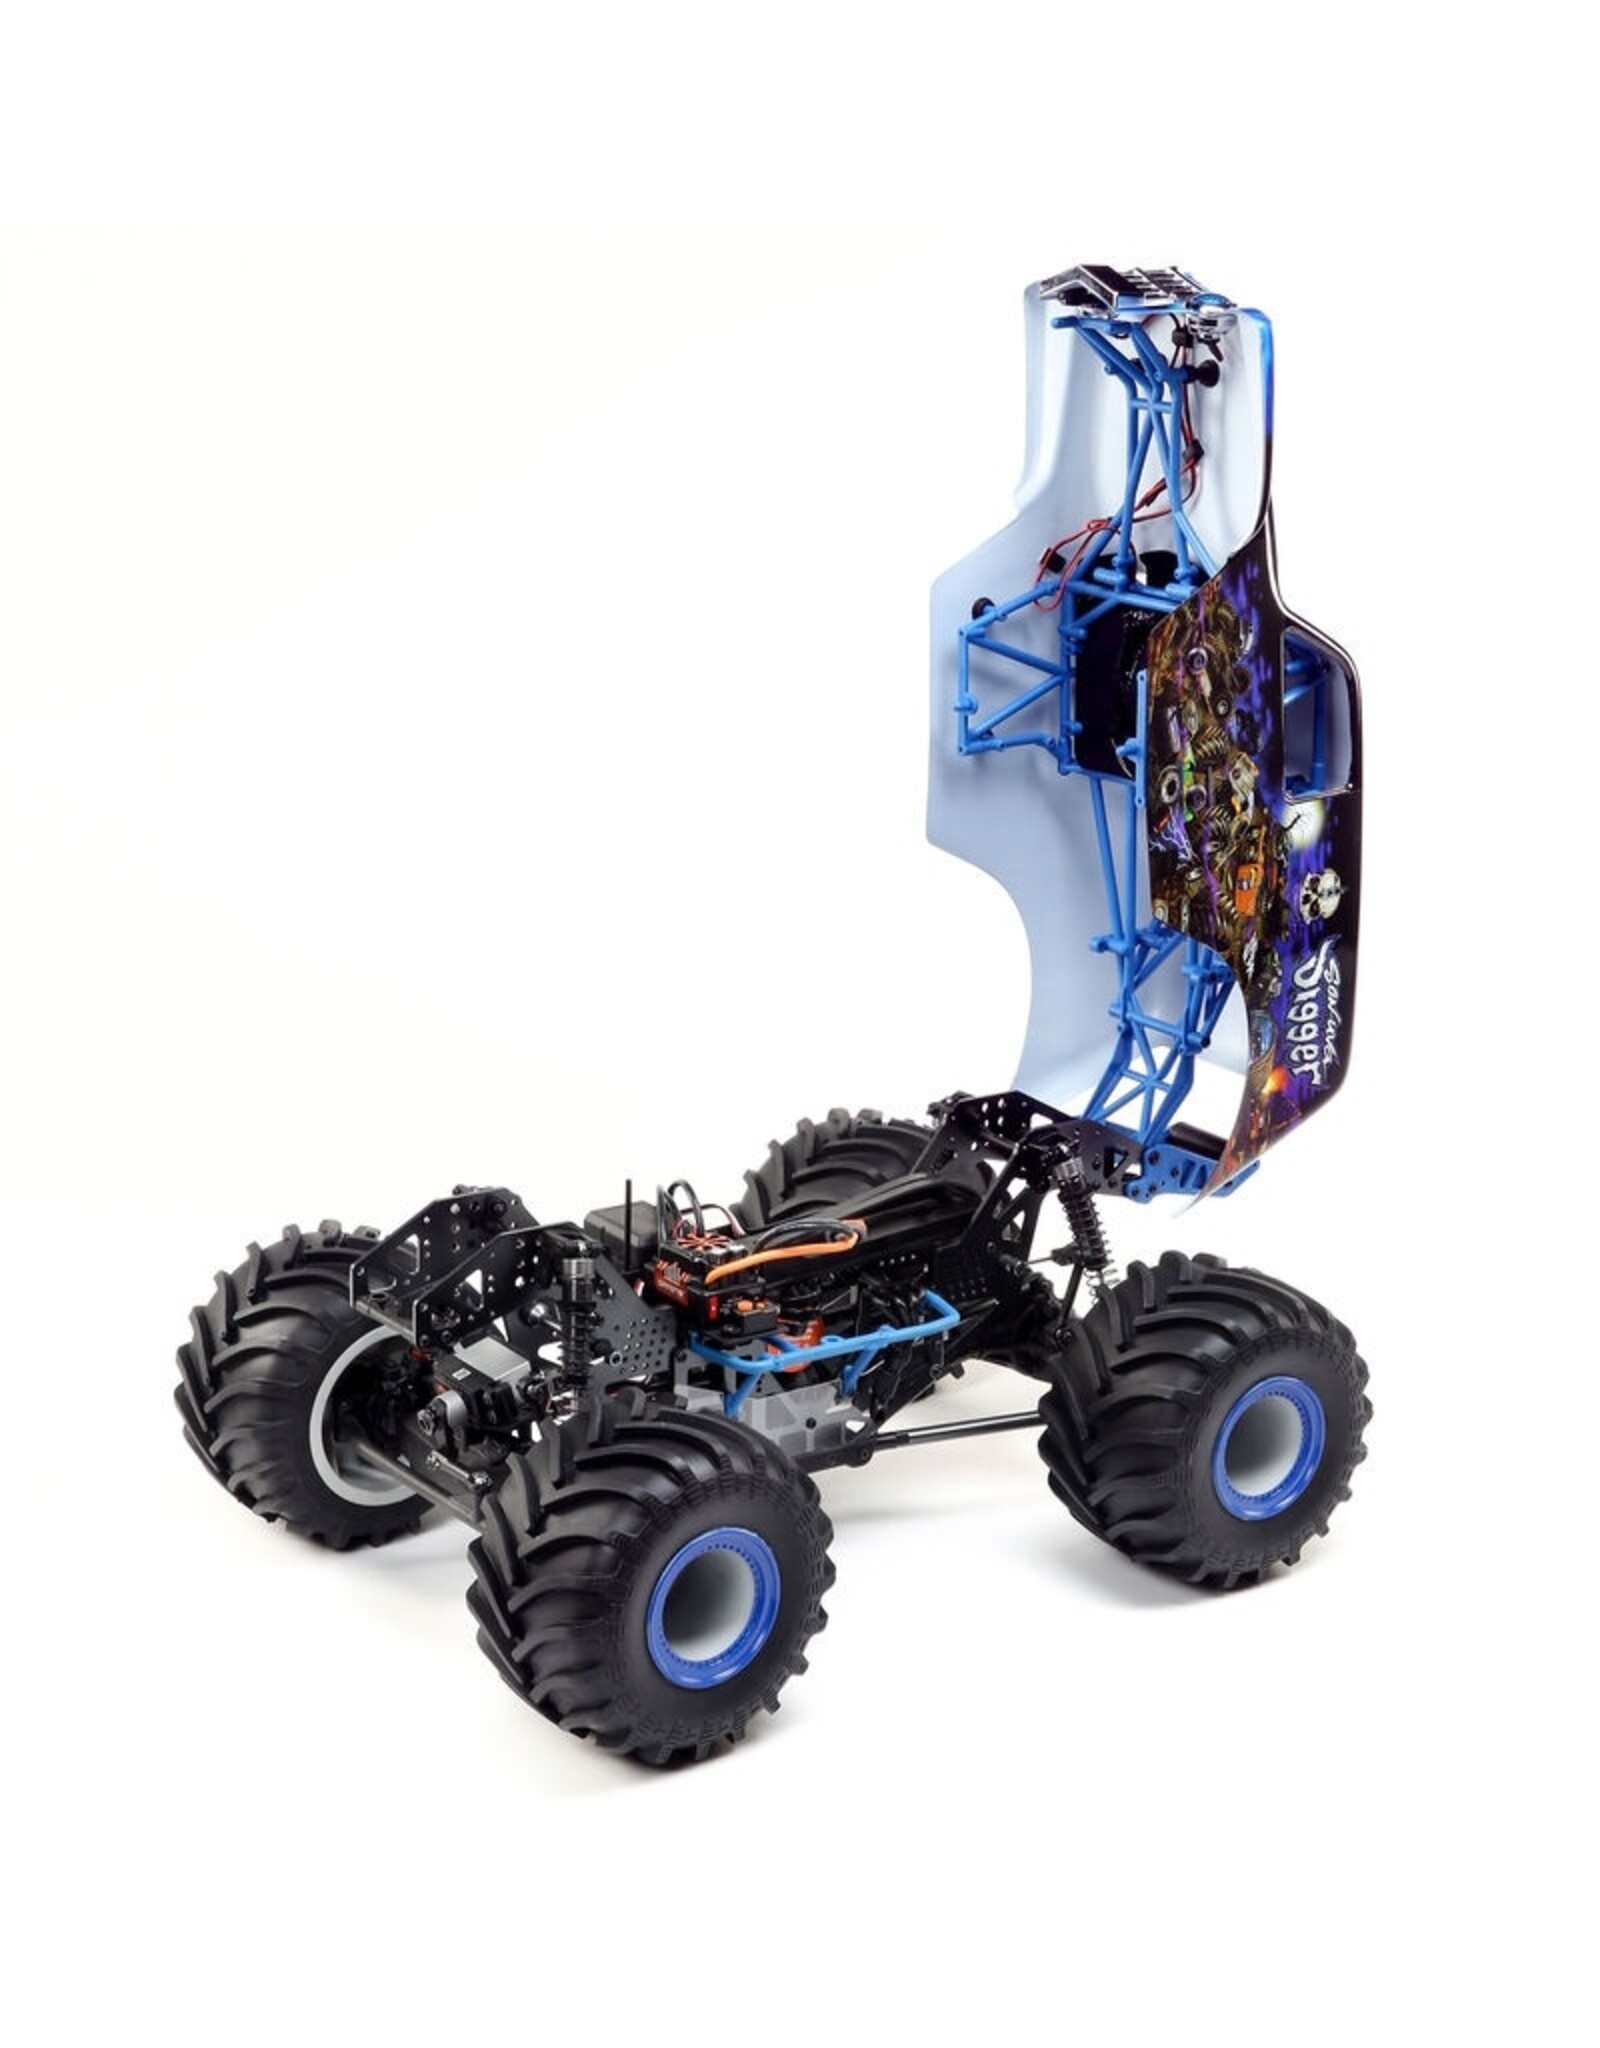 Losi LOS04021T2 LMT 4WD Solid Axle Monster Truck RTR, Son-uva Digger